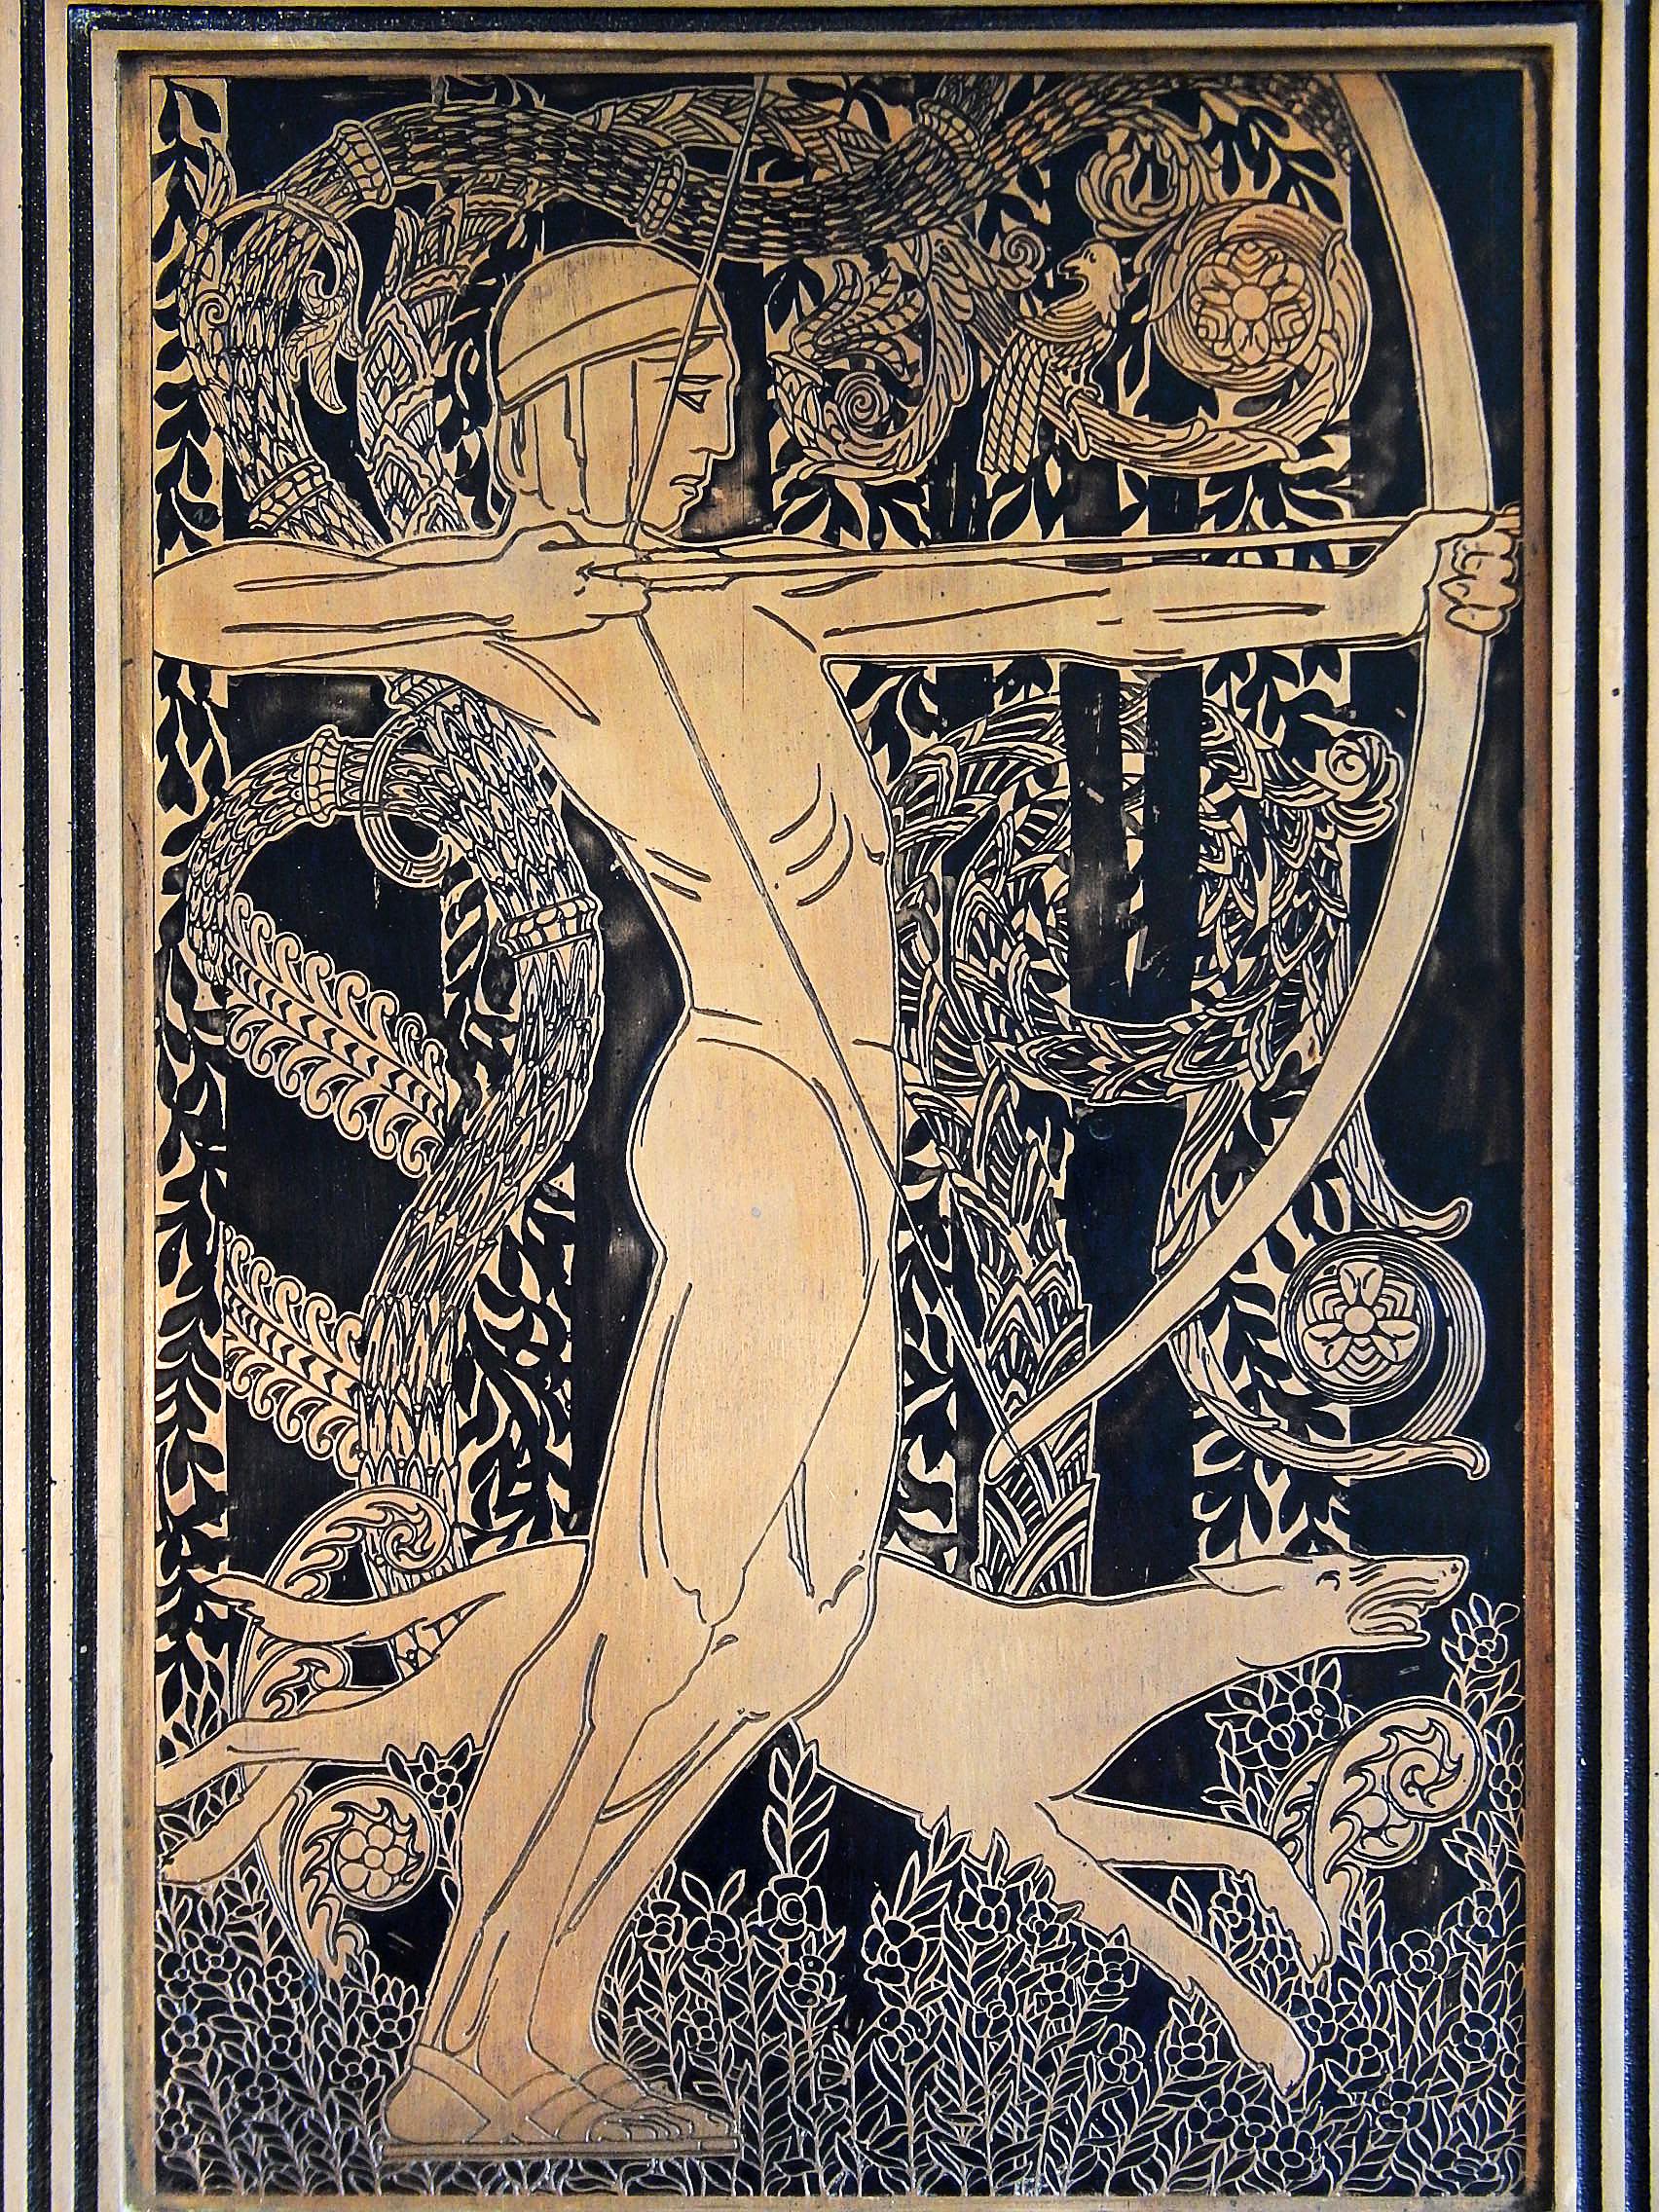 Strikingly designed and beautifully realized, this incised and enameled bronze panel depicts a nude youth drawing his bow, with a running hound at his feet, clearly showing the influence of 1920s French Art Deco design, as well as stylized Medieval